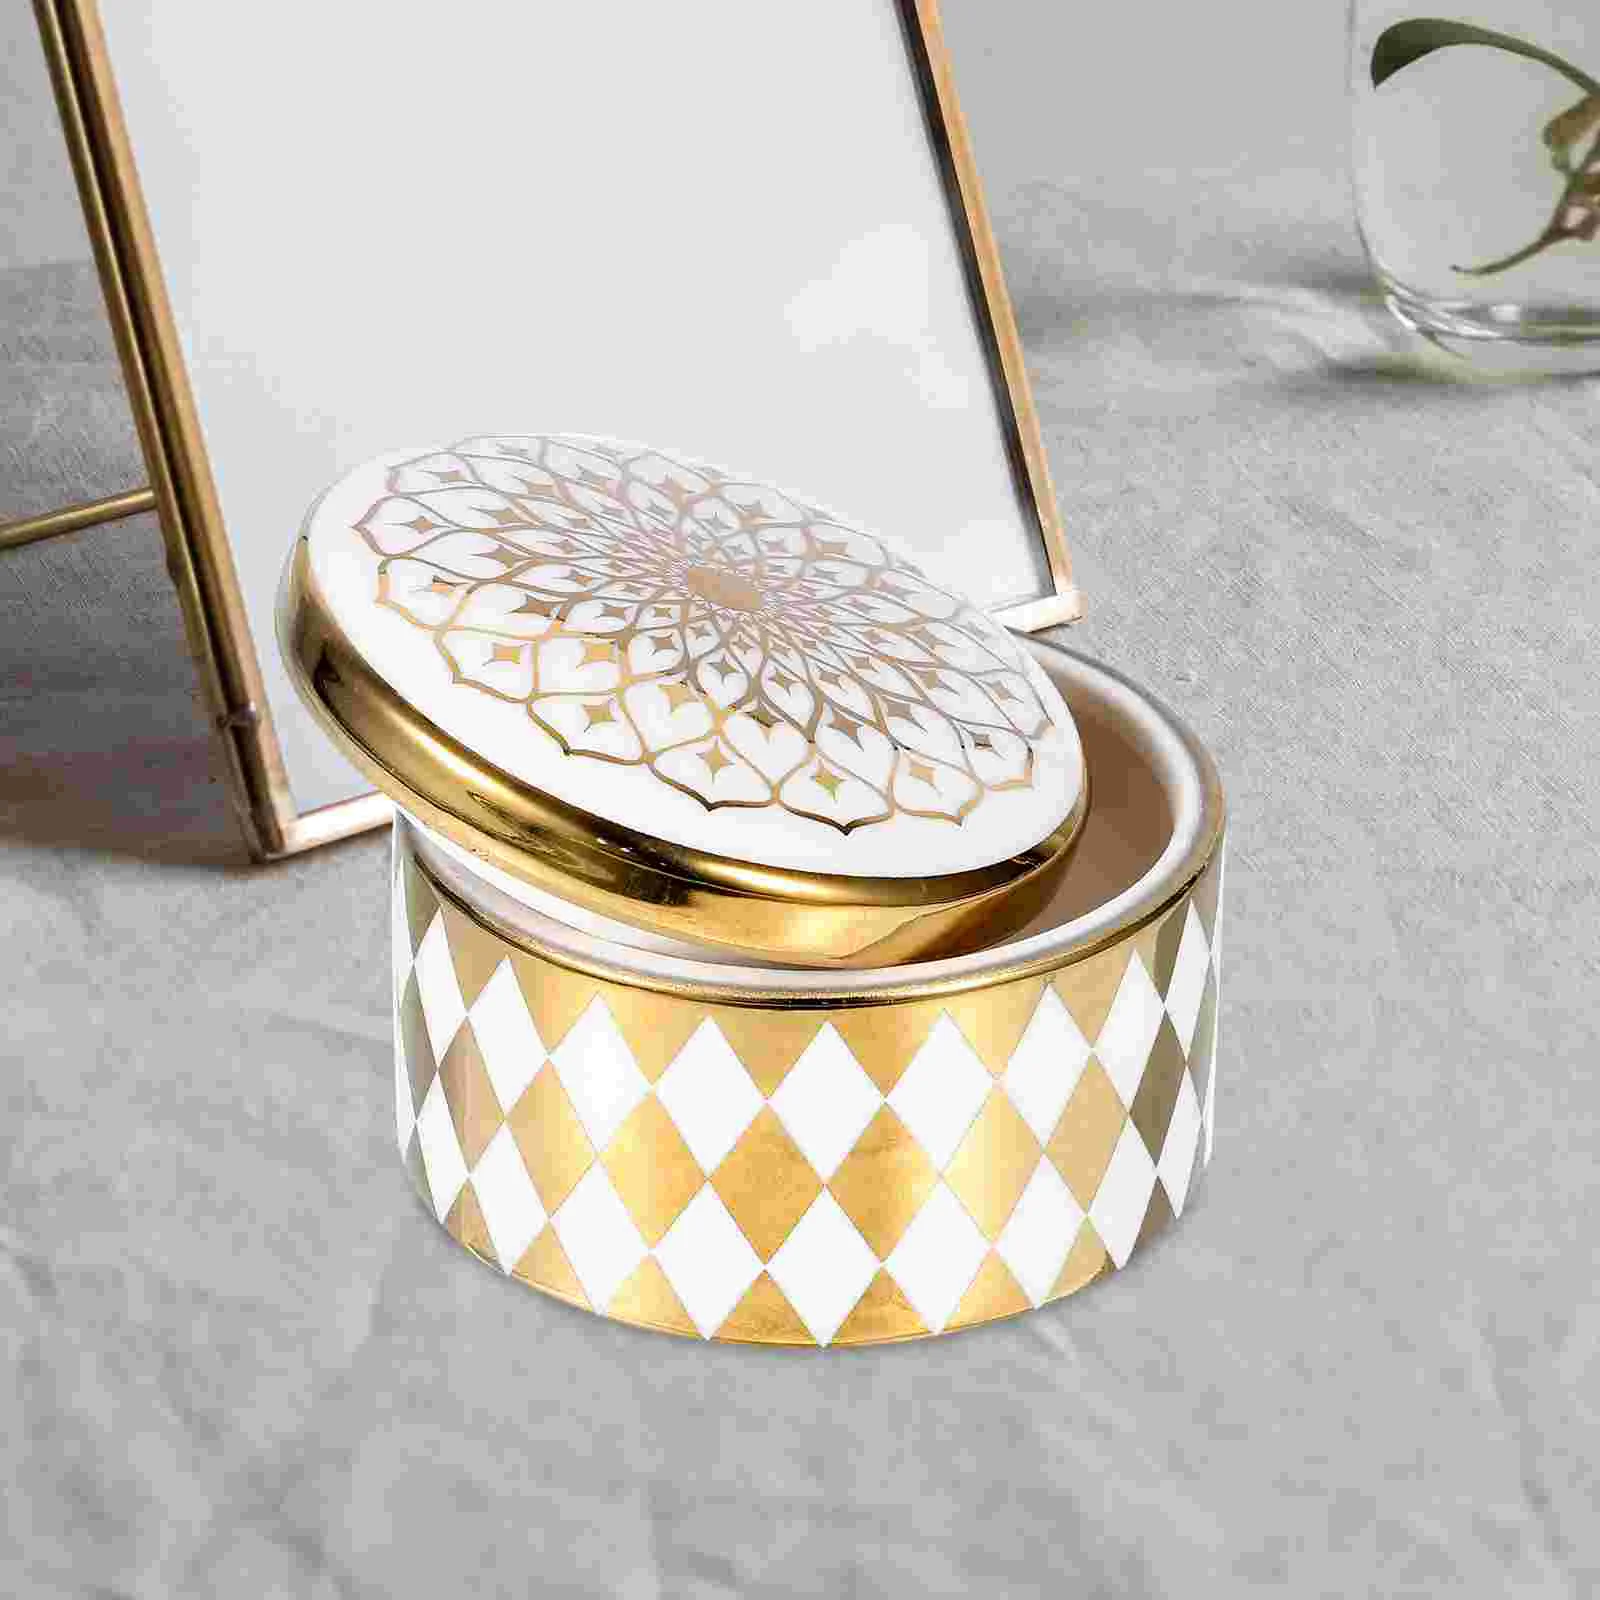 

Jewelry Case Necklace Holder Trinket Storage Box Container White Porcelain Earring Decorative